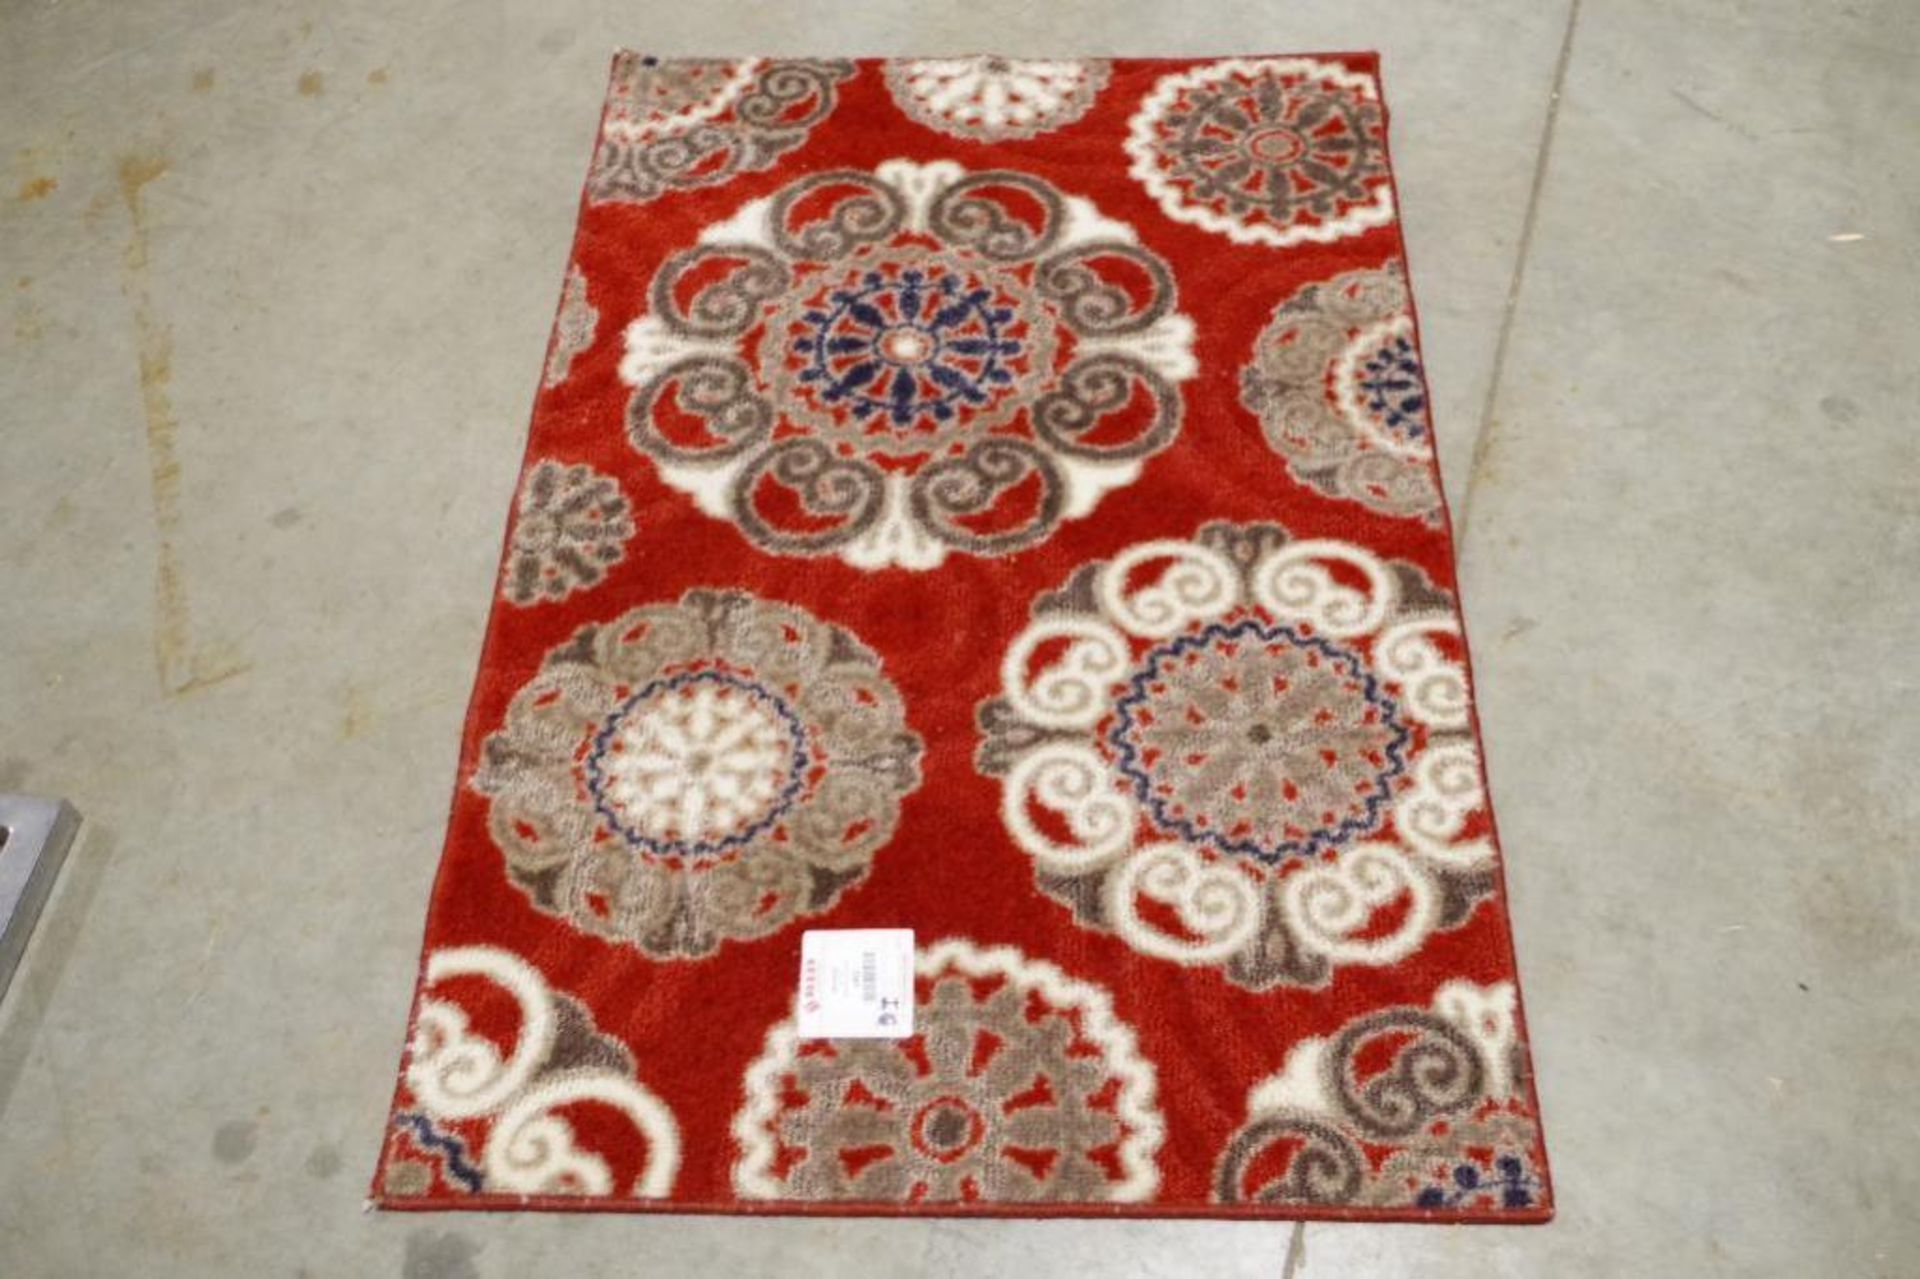 MAPLES RUG Print Gallery Size: 30" x 45" - Image 3 of 3